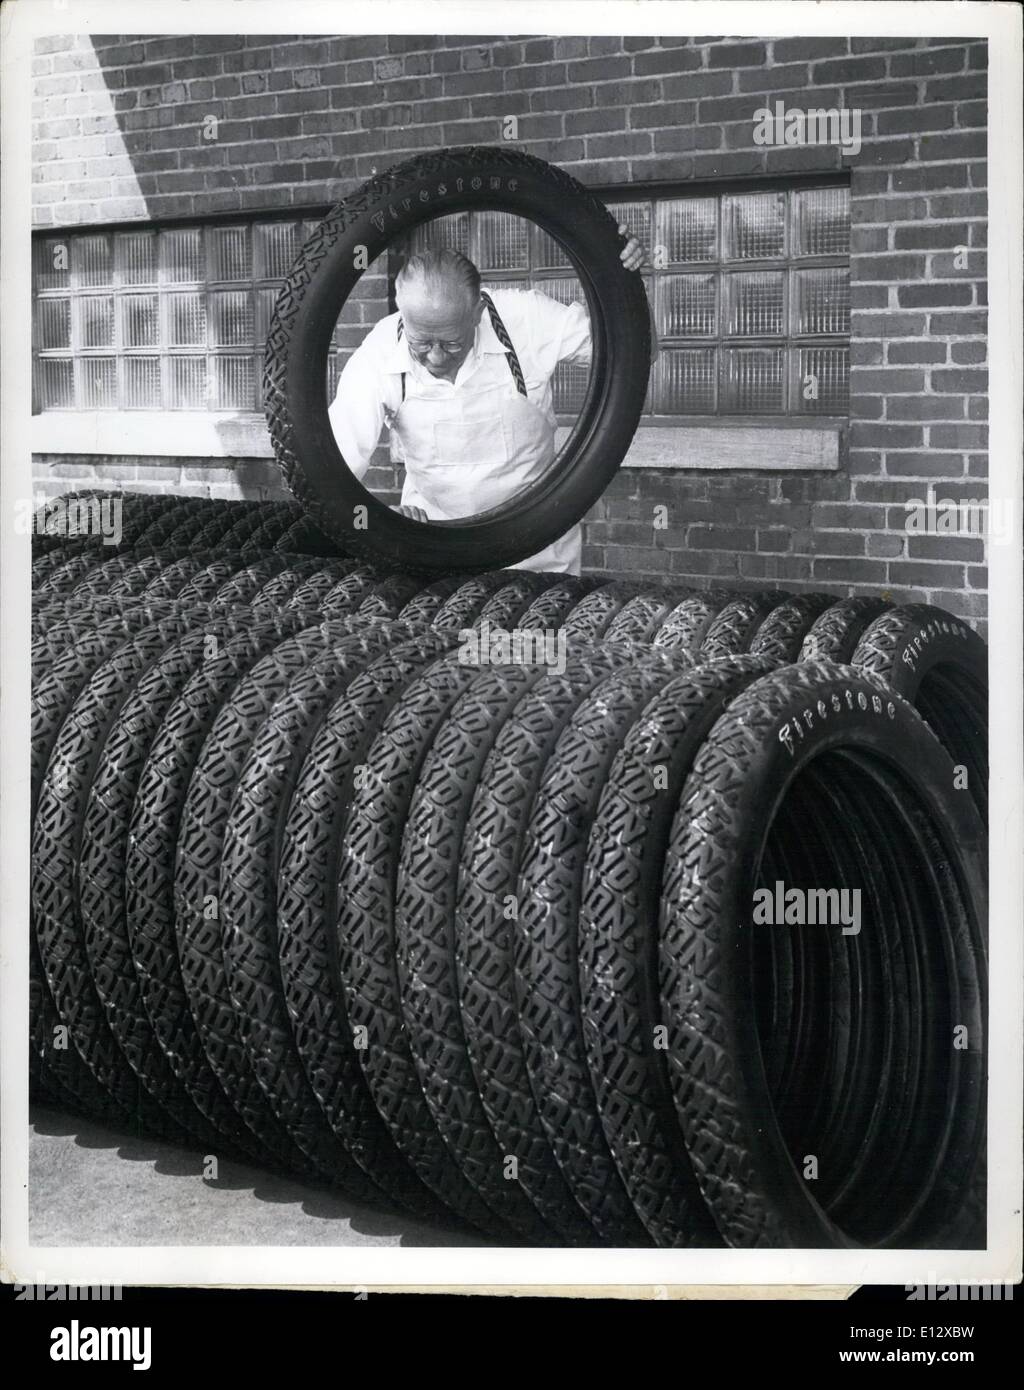 Feb. 26, 2012 - First shipment of old-fashioned tires is on its way from Akron, Ohio, to Washington to meet the needs of the 200 antique automobile owners who will parade down Constitution Avenue September 23 in celebration of the 50th anniversary of the American Automobile Association. Such tires are laboriously made by hand by veteran employees of The Firestone Tire & Rubber Company to duplicate the ones used in the early 1900's. Forty years ago William H. Lincks wrapped the same kind of tires he is shown inspecting above as they were readied for shipment from the Firestone plant in Akron Stock Photo